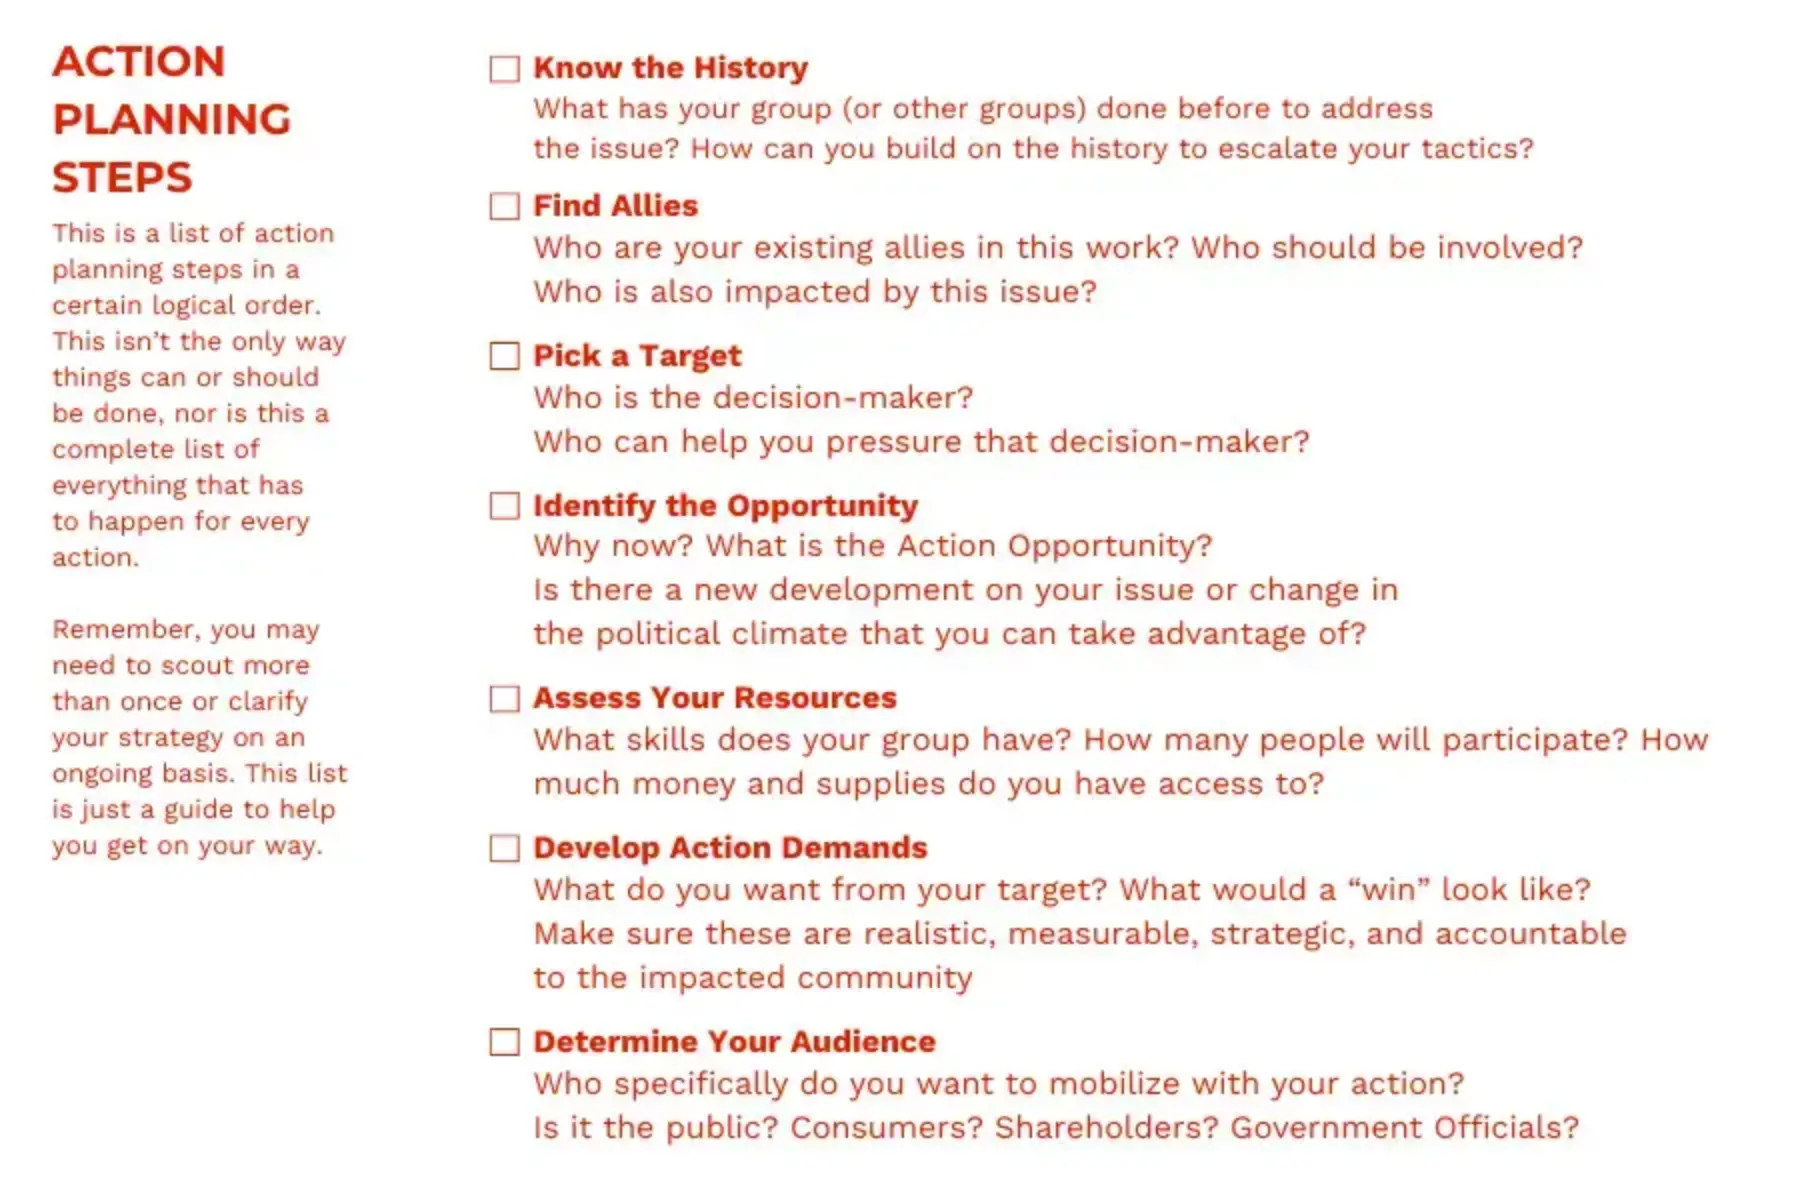 White background with red text that reads Action Planning Steps: This is a list of action planning steps in a certain logical order. This isn’t the only way things can or should be done, nor is this a complete list of everything that has to happen for every action. Remember, you may need to scout more than once or clarify your strategy on an ongoing basis. This list is just a guide to help you get on your way. Know the History: What has your group (or other groups) done before to address the issue? How can you build on the history to escalate your tactics? Find Allies: Who are your existing allies in this work? Who should be involved? Who is also impacted by this issue? Pick a Target: Who is the decision-maker? Who can help you pressure that decision-maker? Identify the Opportunity: Why now? What is the Action Opportunity? Is there a new development on your issue or change in the political climate that you can take advantage of? Assess Your Resources: What skills does your group have? How many people will participate? How much money and supplies do you have access to? Develop Action Demands: What do you want from your target? What would a “win” look like? Make sure these are realistic, measurable, strategic, and accountable to the impacted community; Determine Your Audience: Who specifically do you want to mobilize with your action? Is it the public? Consumers? Shareholders? Government Officials?